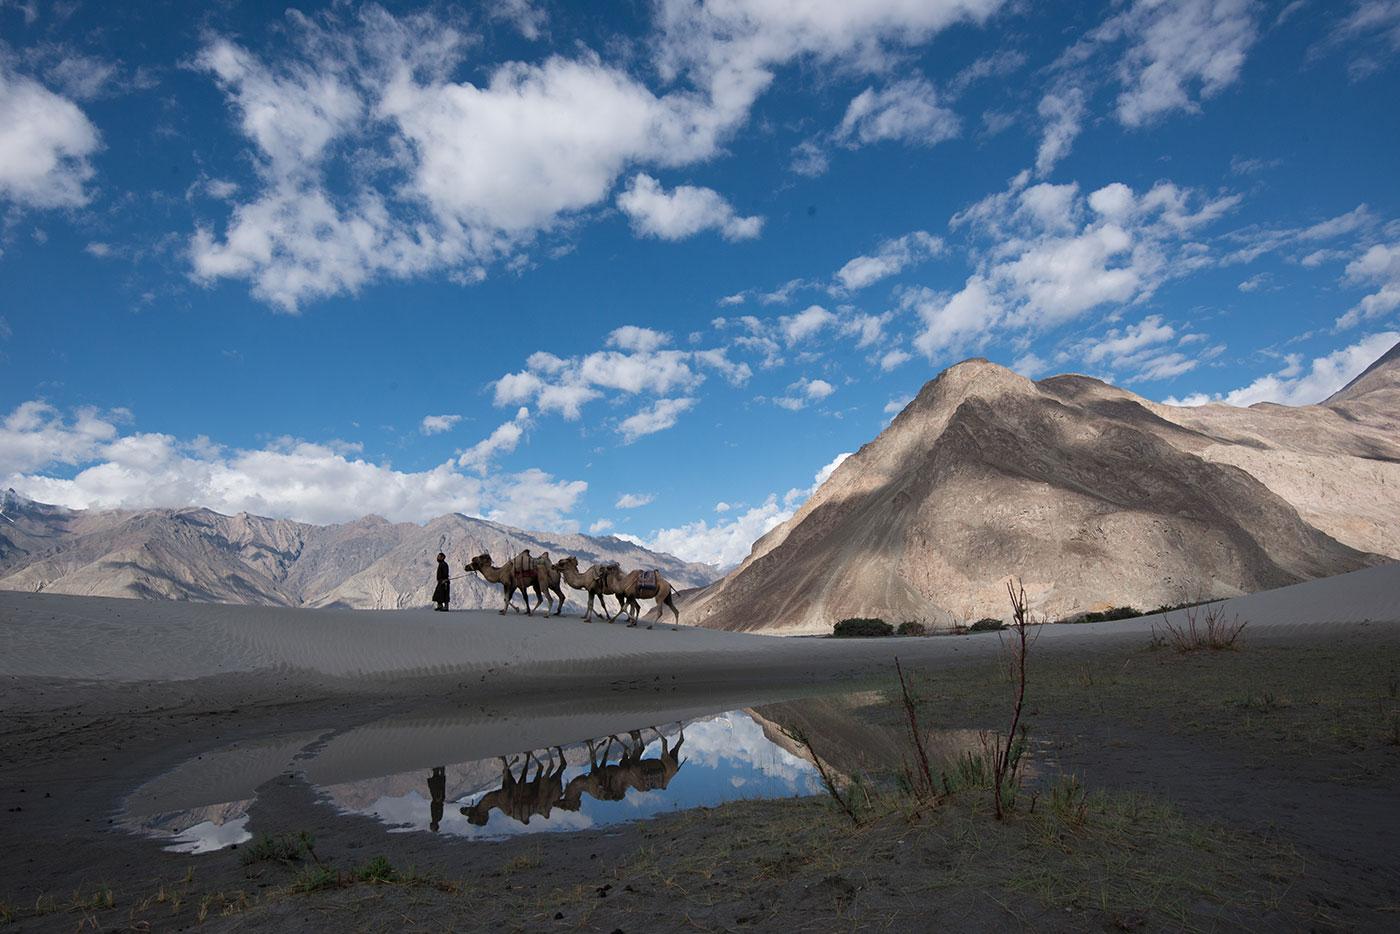 A camel herder leads his camel train over the sand dunes in Nubra Valley, India. Photo: BBC/Alex Lanchester